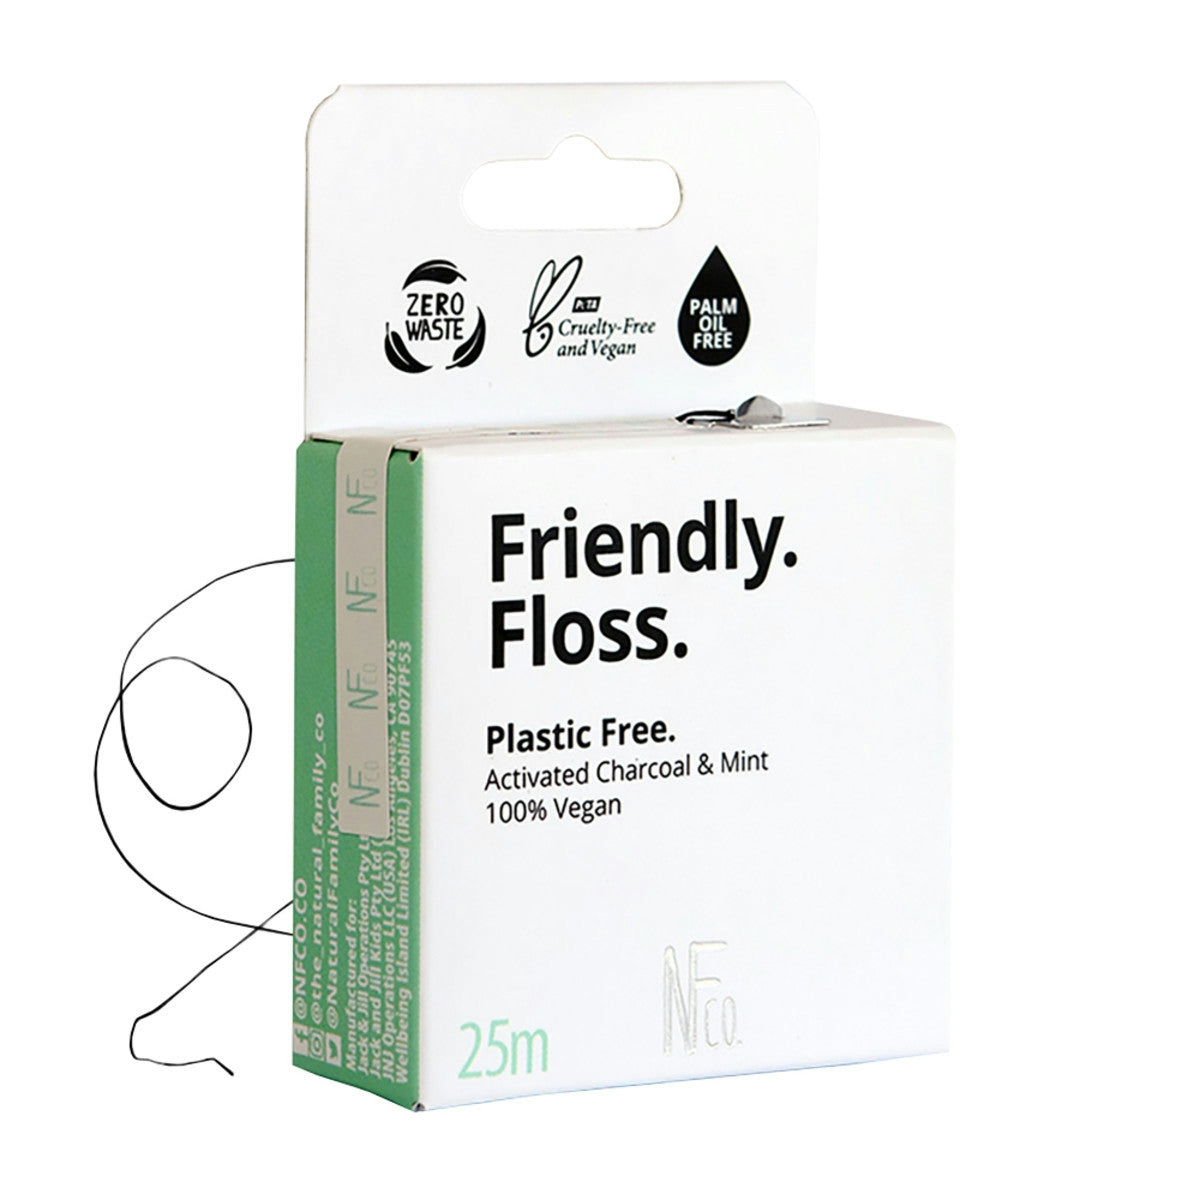 Image of The Natural Family Co. Friendly Floss. (Activated Charcoal & Mint) 25m with white background